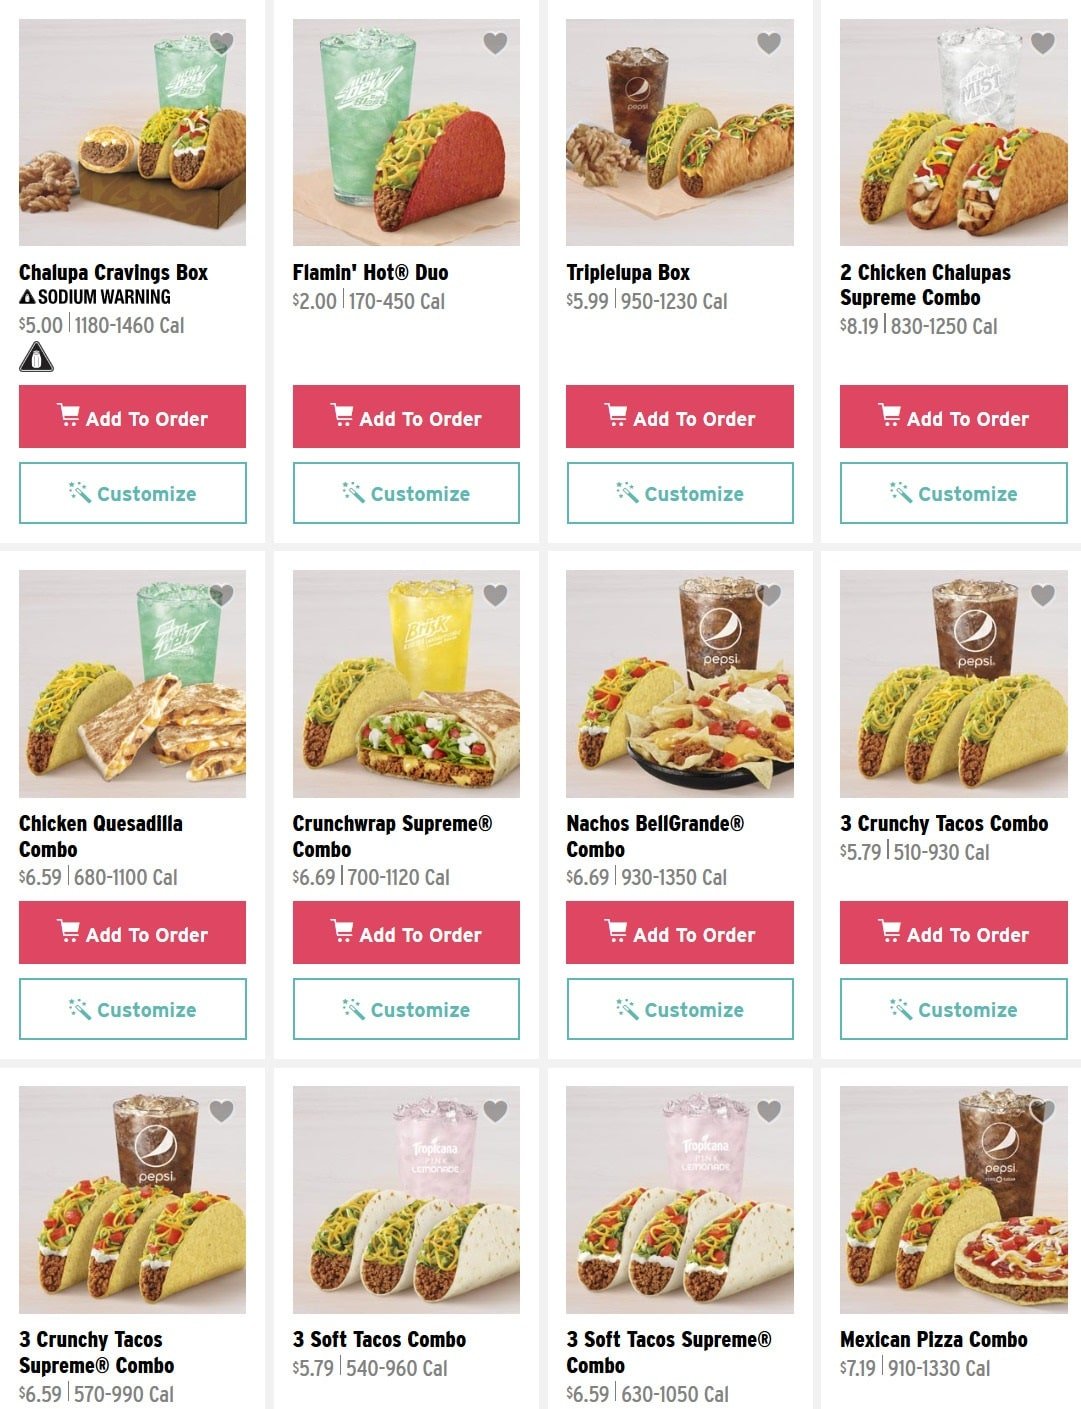 Printable Taco Bell Menu With Prices